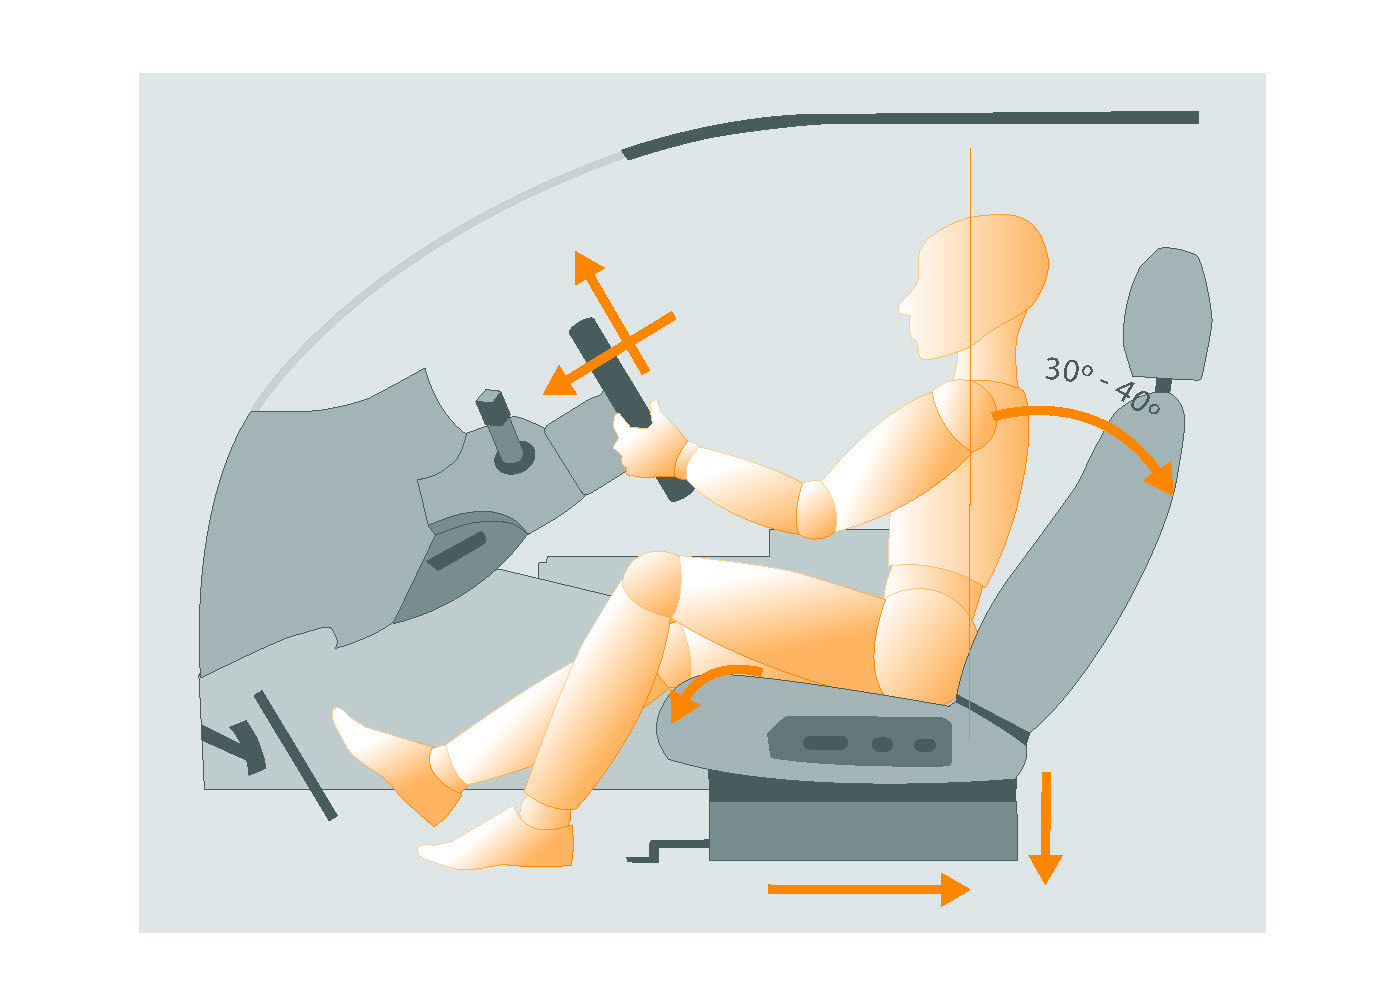 How to Adjust Seating to the Proper Position While Driving